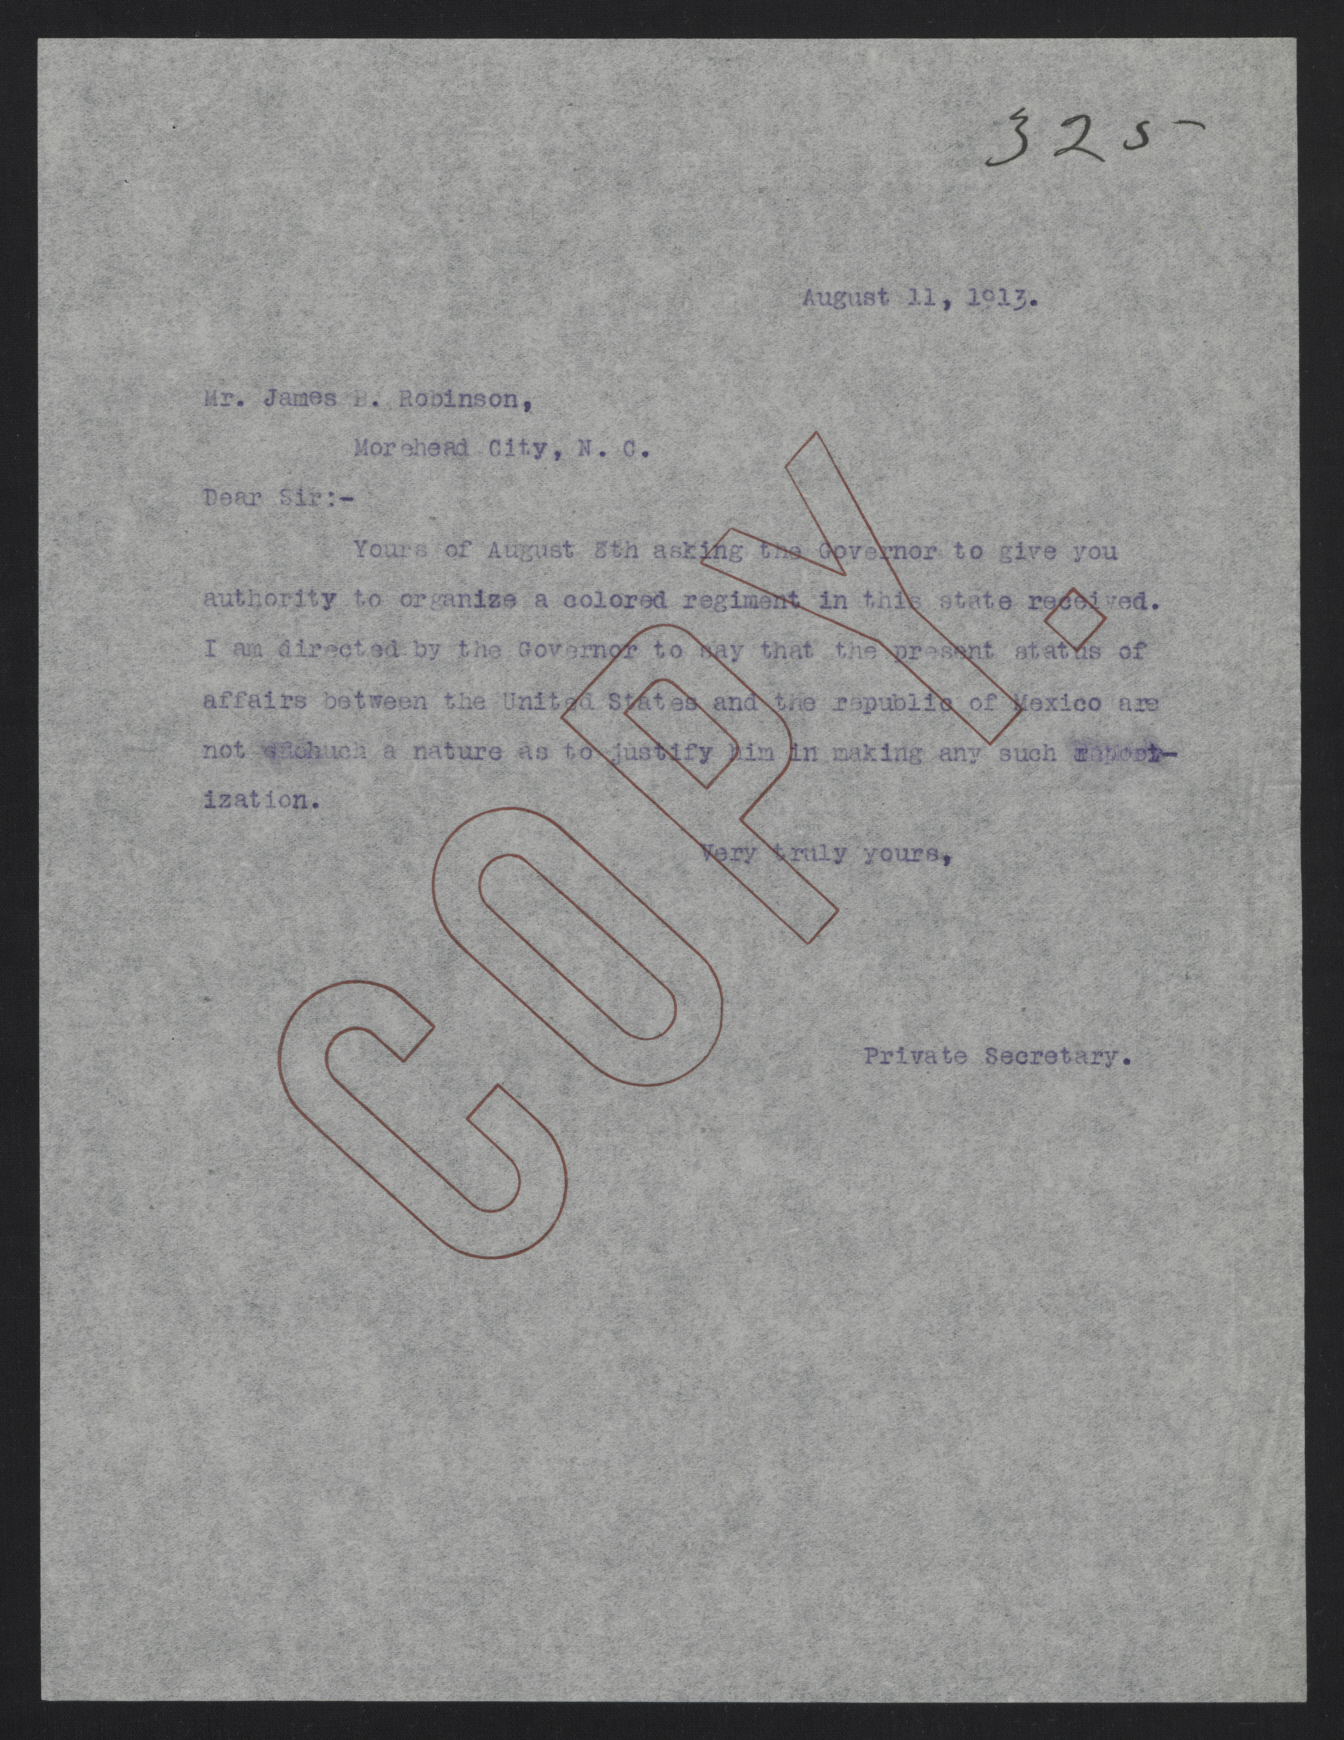 Letter from Kerr to Robinson, August 11, 1913